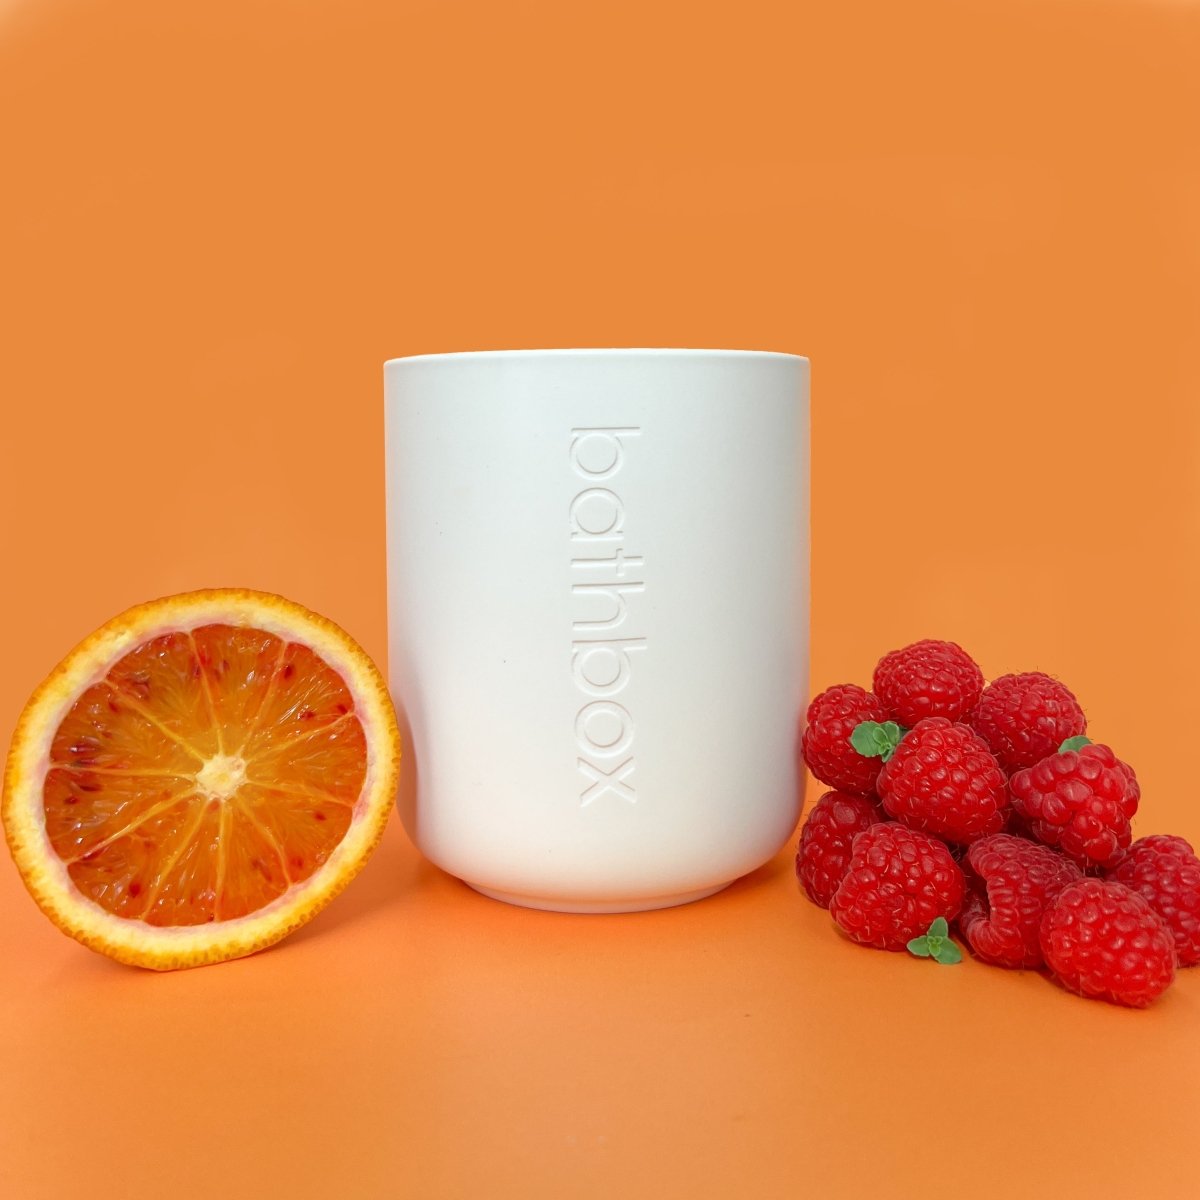 Raspberry Orange Candle - Natural Soy Wax, Large Triple Scented, Strong Double Wick Candle by Bath Box Australia